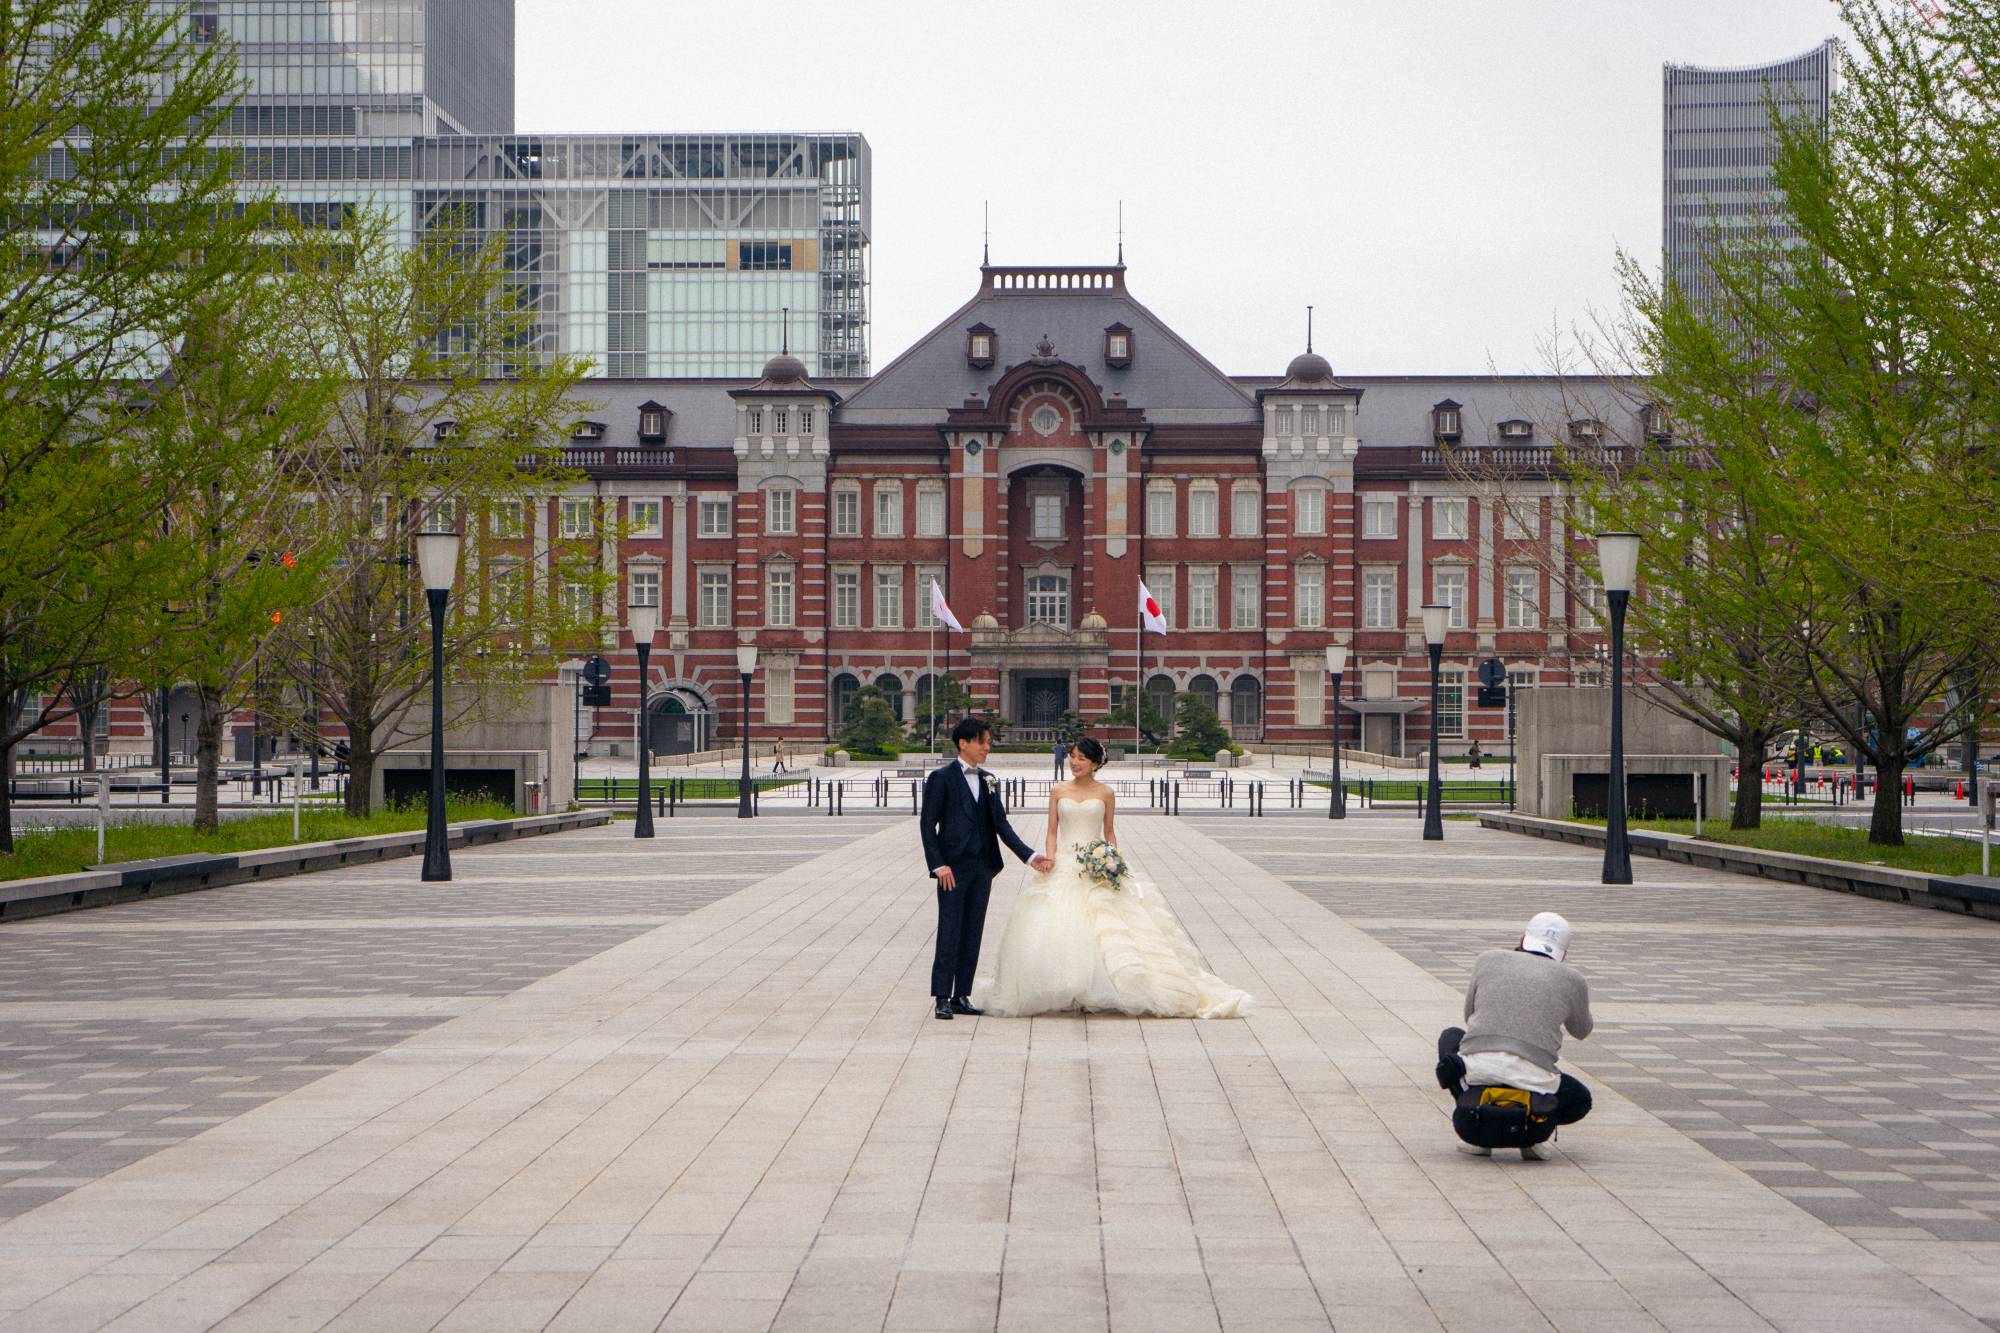 While the state of emergency forced an abrupt change to most people’s lives, some saw the empty city as an opportunity. Here a couple uses an empty Tokyo Station as a backdrop for their wedding photos. On average, more than 500,000 people use Tokyo Station every day. | OSCAR BOYD